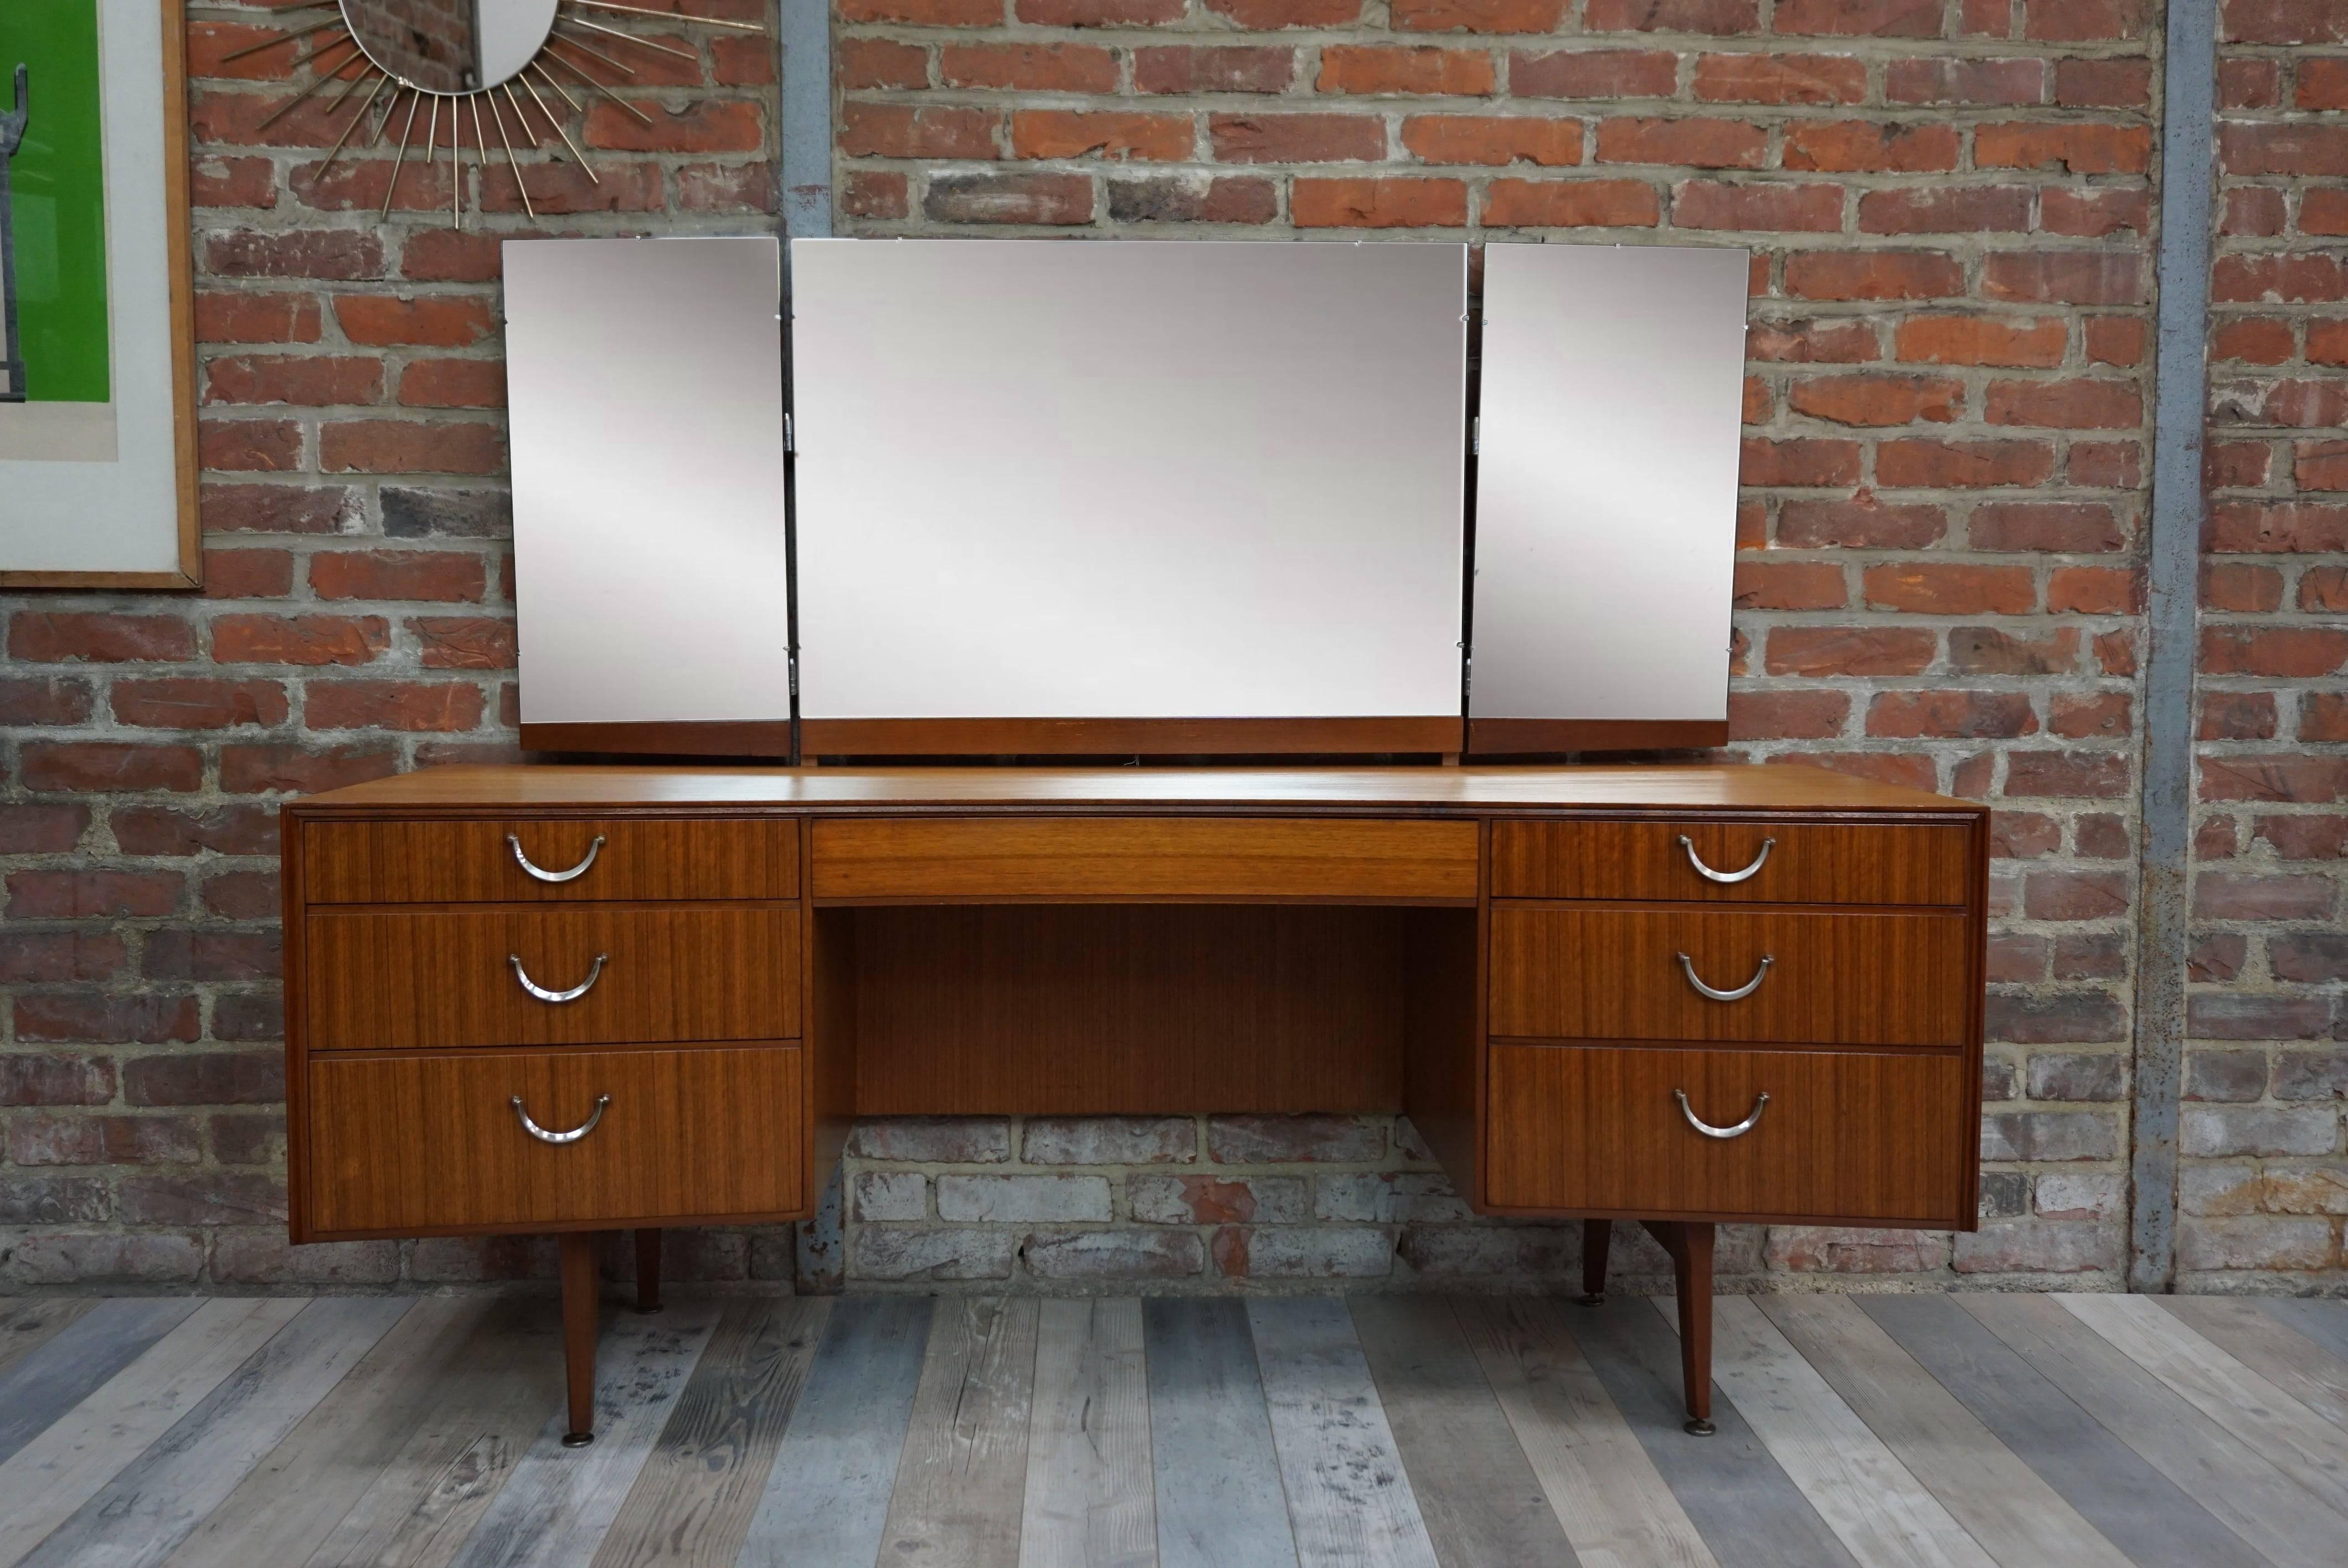 Sublime and rare teak furniture of the 1950s, to use in your entry, your living room or even your room it's up to you to recreate its history. Offering large storage spaces, sleek look, curved structure, with or without its triptych mirror, it will